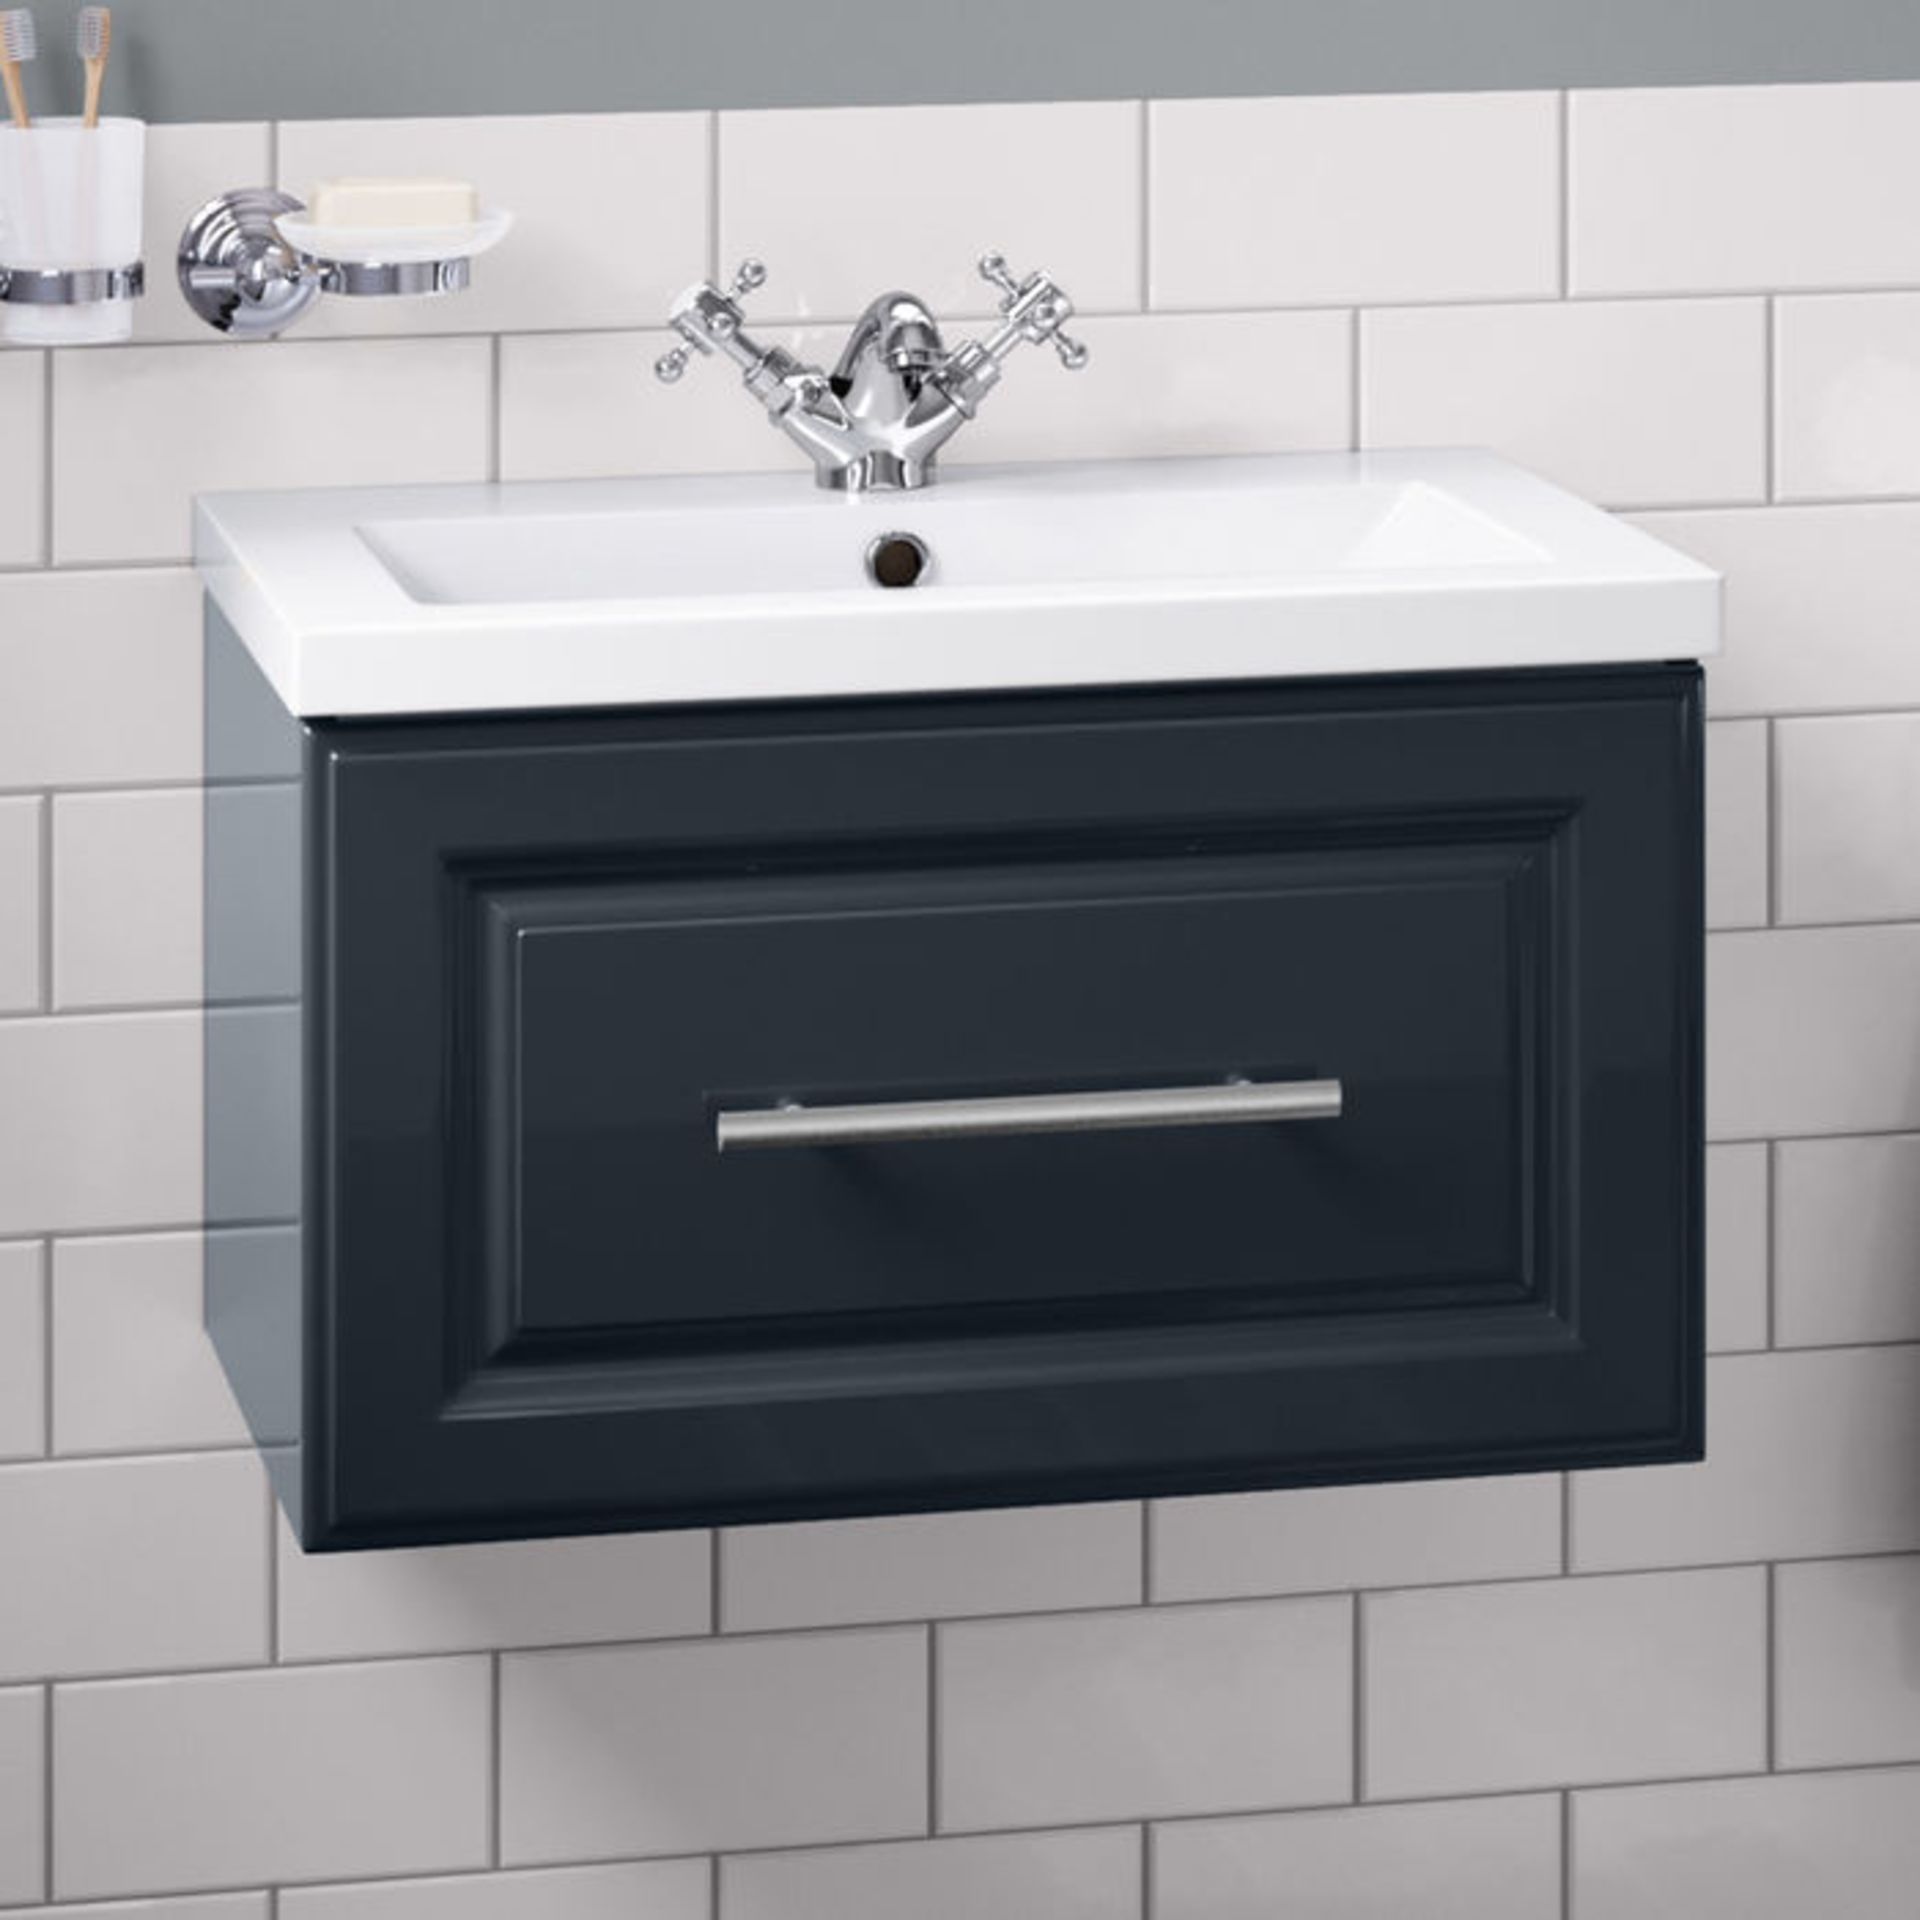 (XM188) 600mm Arden Gloss Black Blue Vanity Unit - Wall Hung. RRP £499.99. Comes complete with